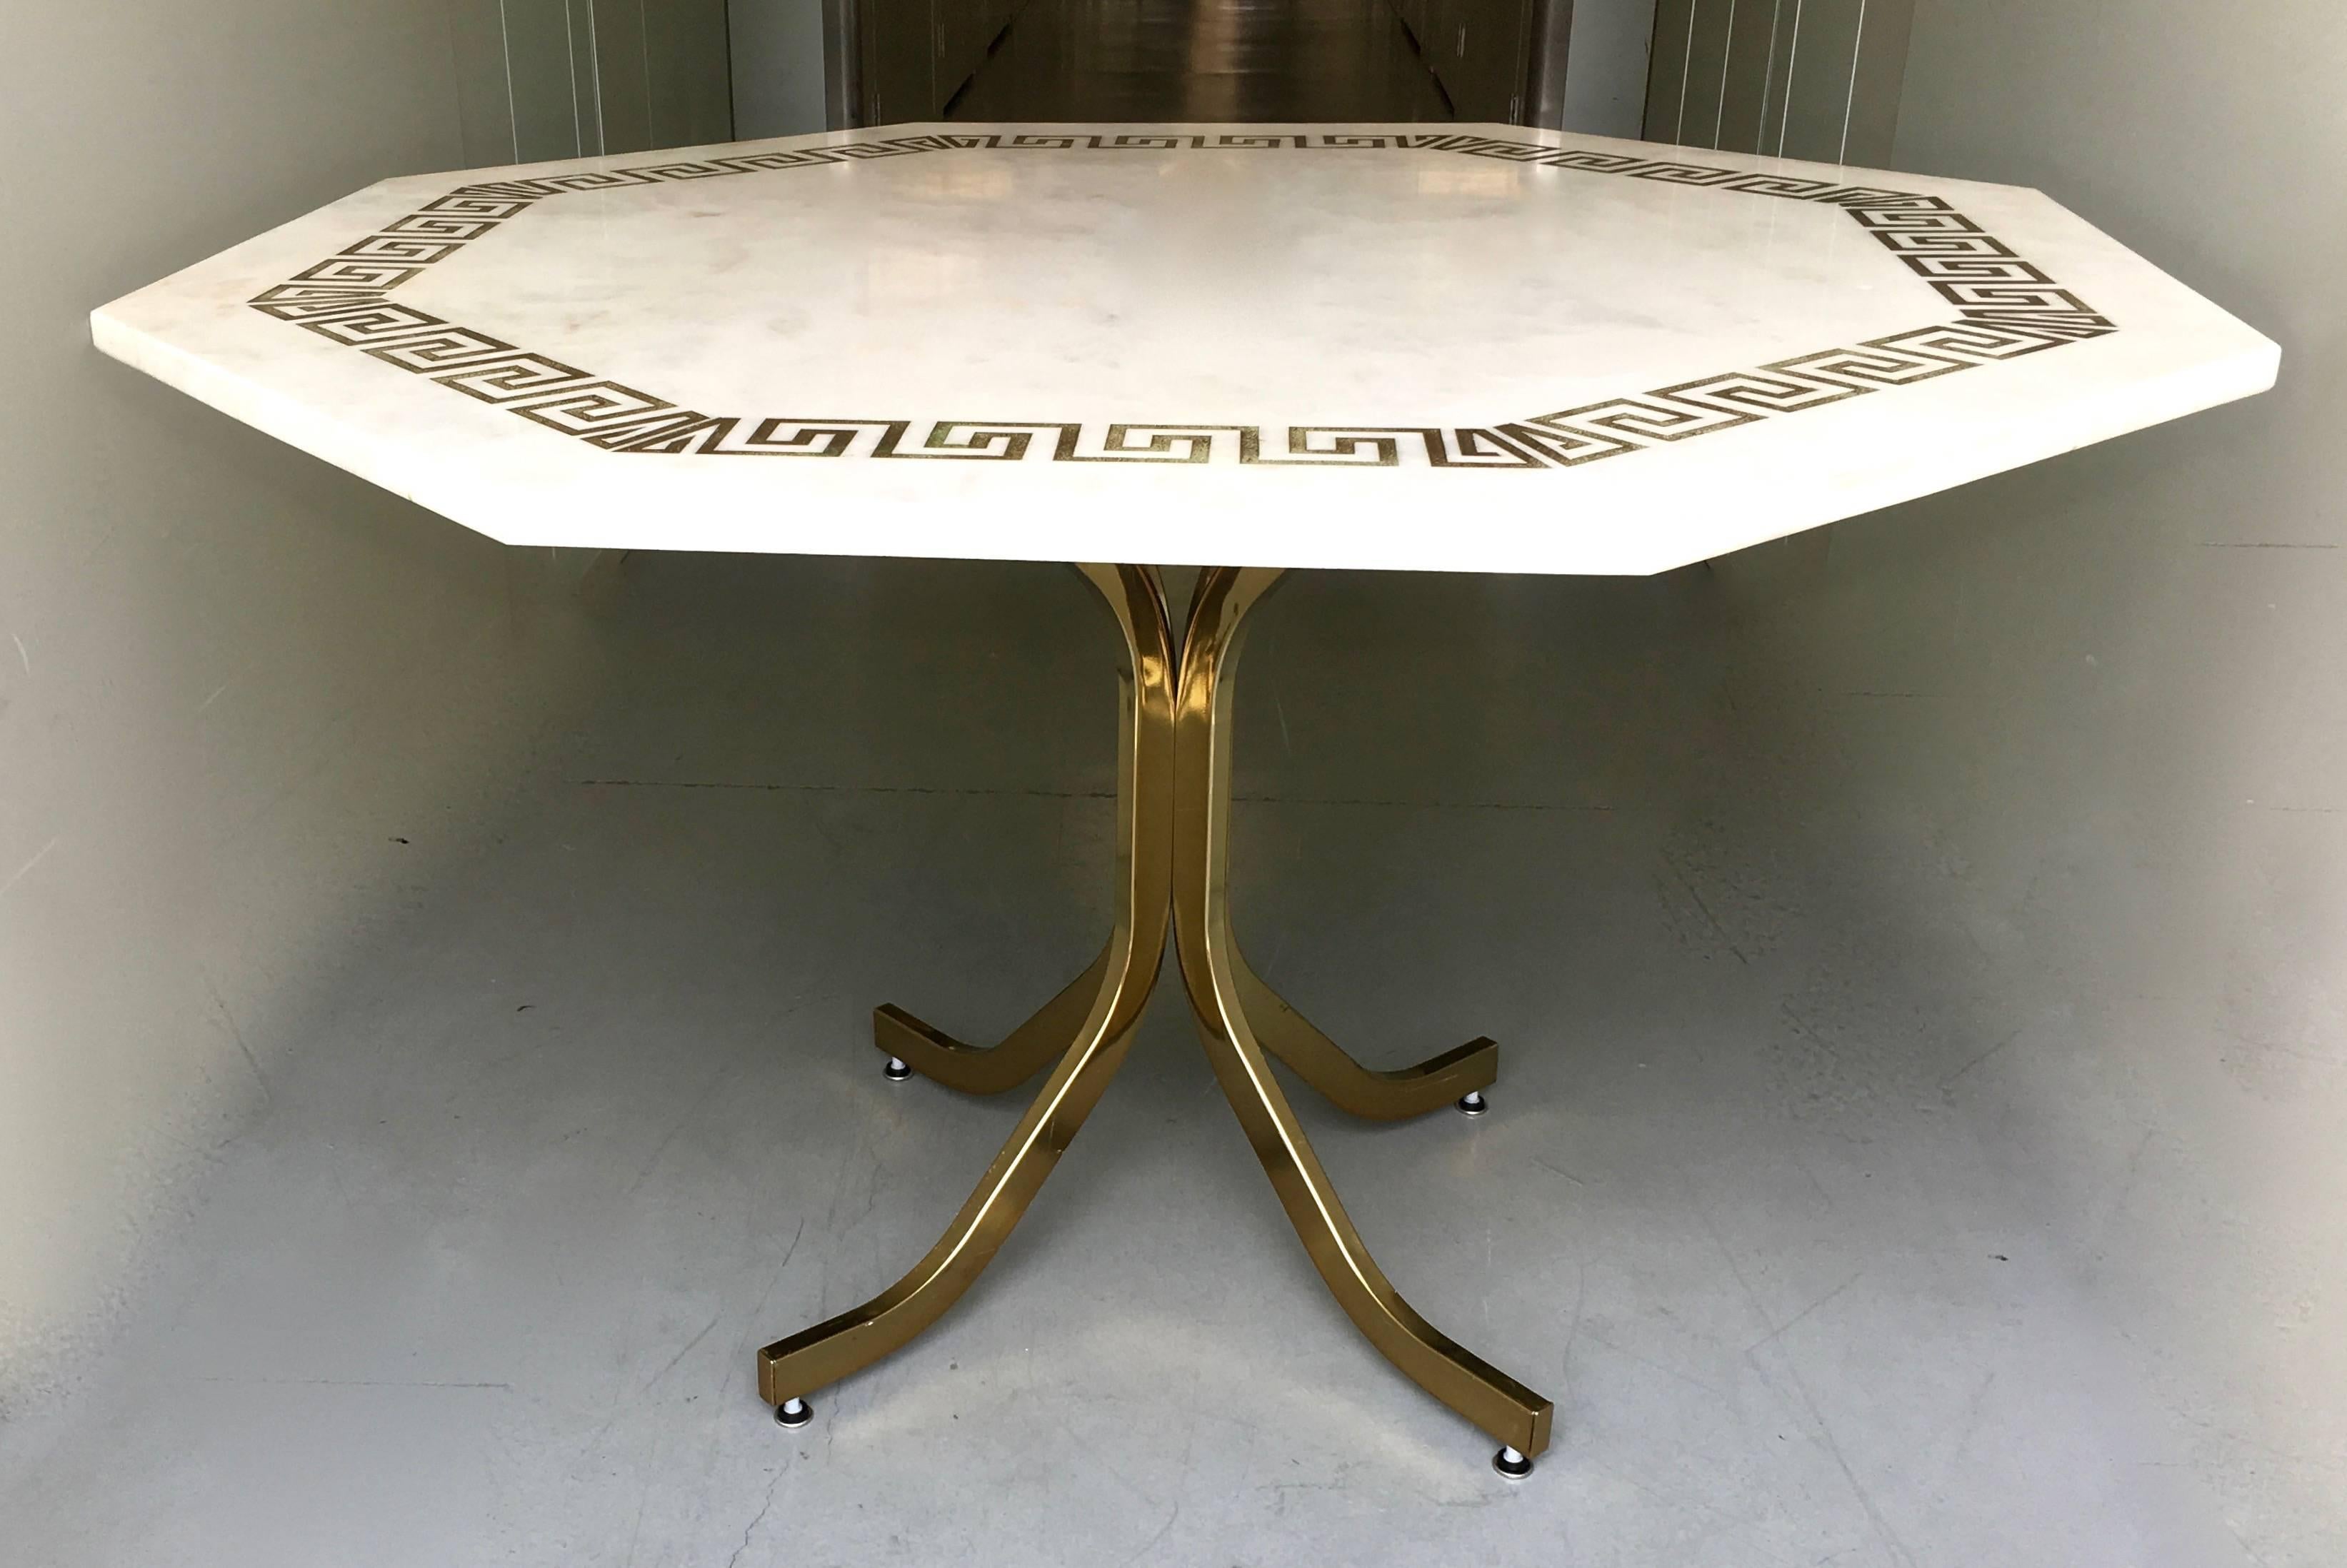 Gorgeous white Italian marble table with etched gilt Greek key border design. Flexible size and design that enables it to be used for an entry table, or dining table.

A stunning piece of subtly mottled marble, sits atop a brass base, with